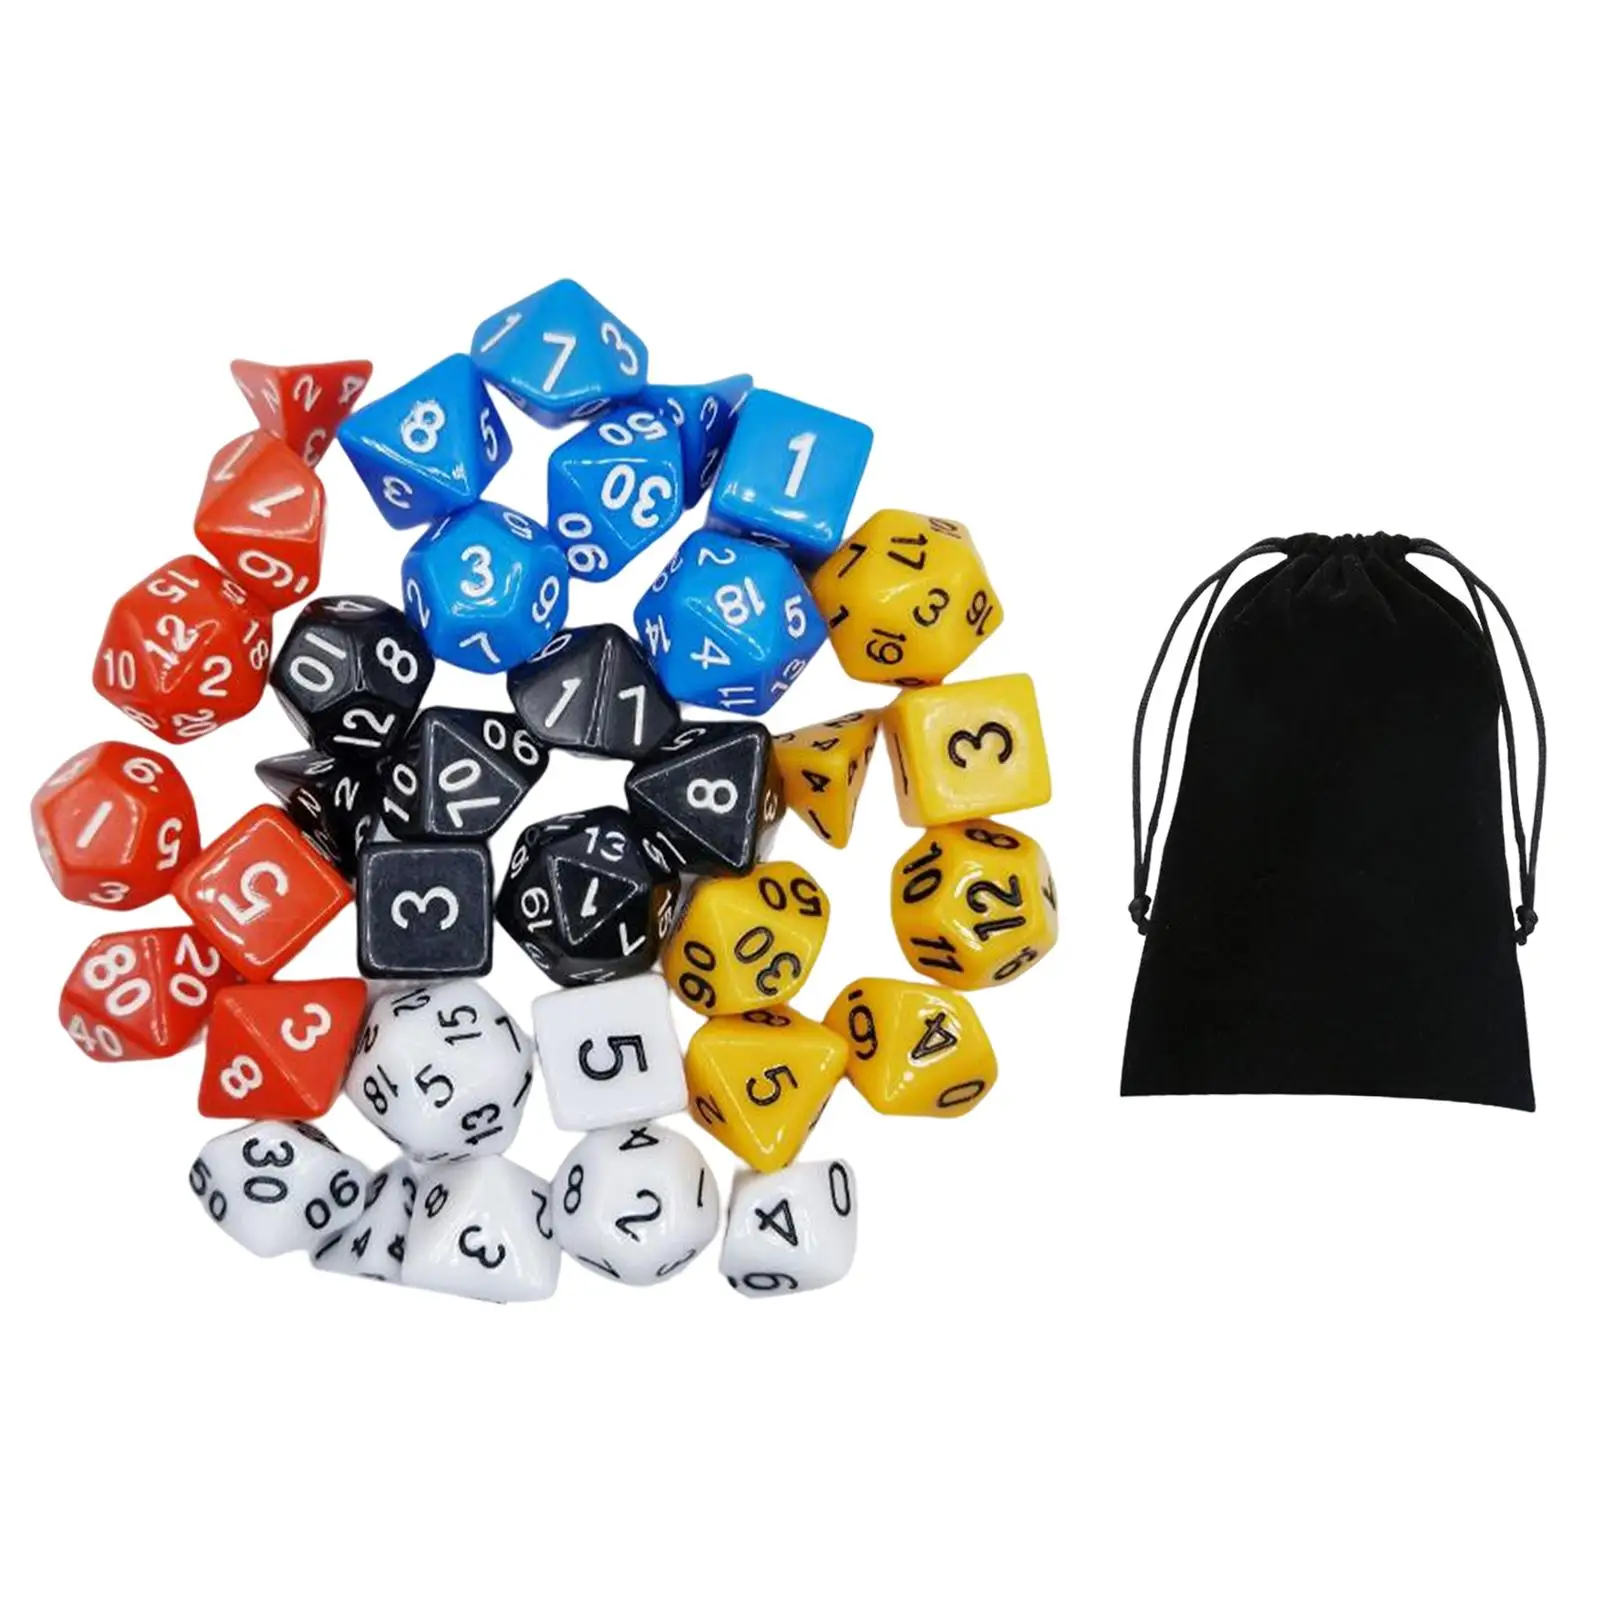 Acrylic Polyhedral Dices Set Toys Favors Engraved Game Dices for Roll Playing Games Board Game Prop Table Games KTV Parties